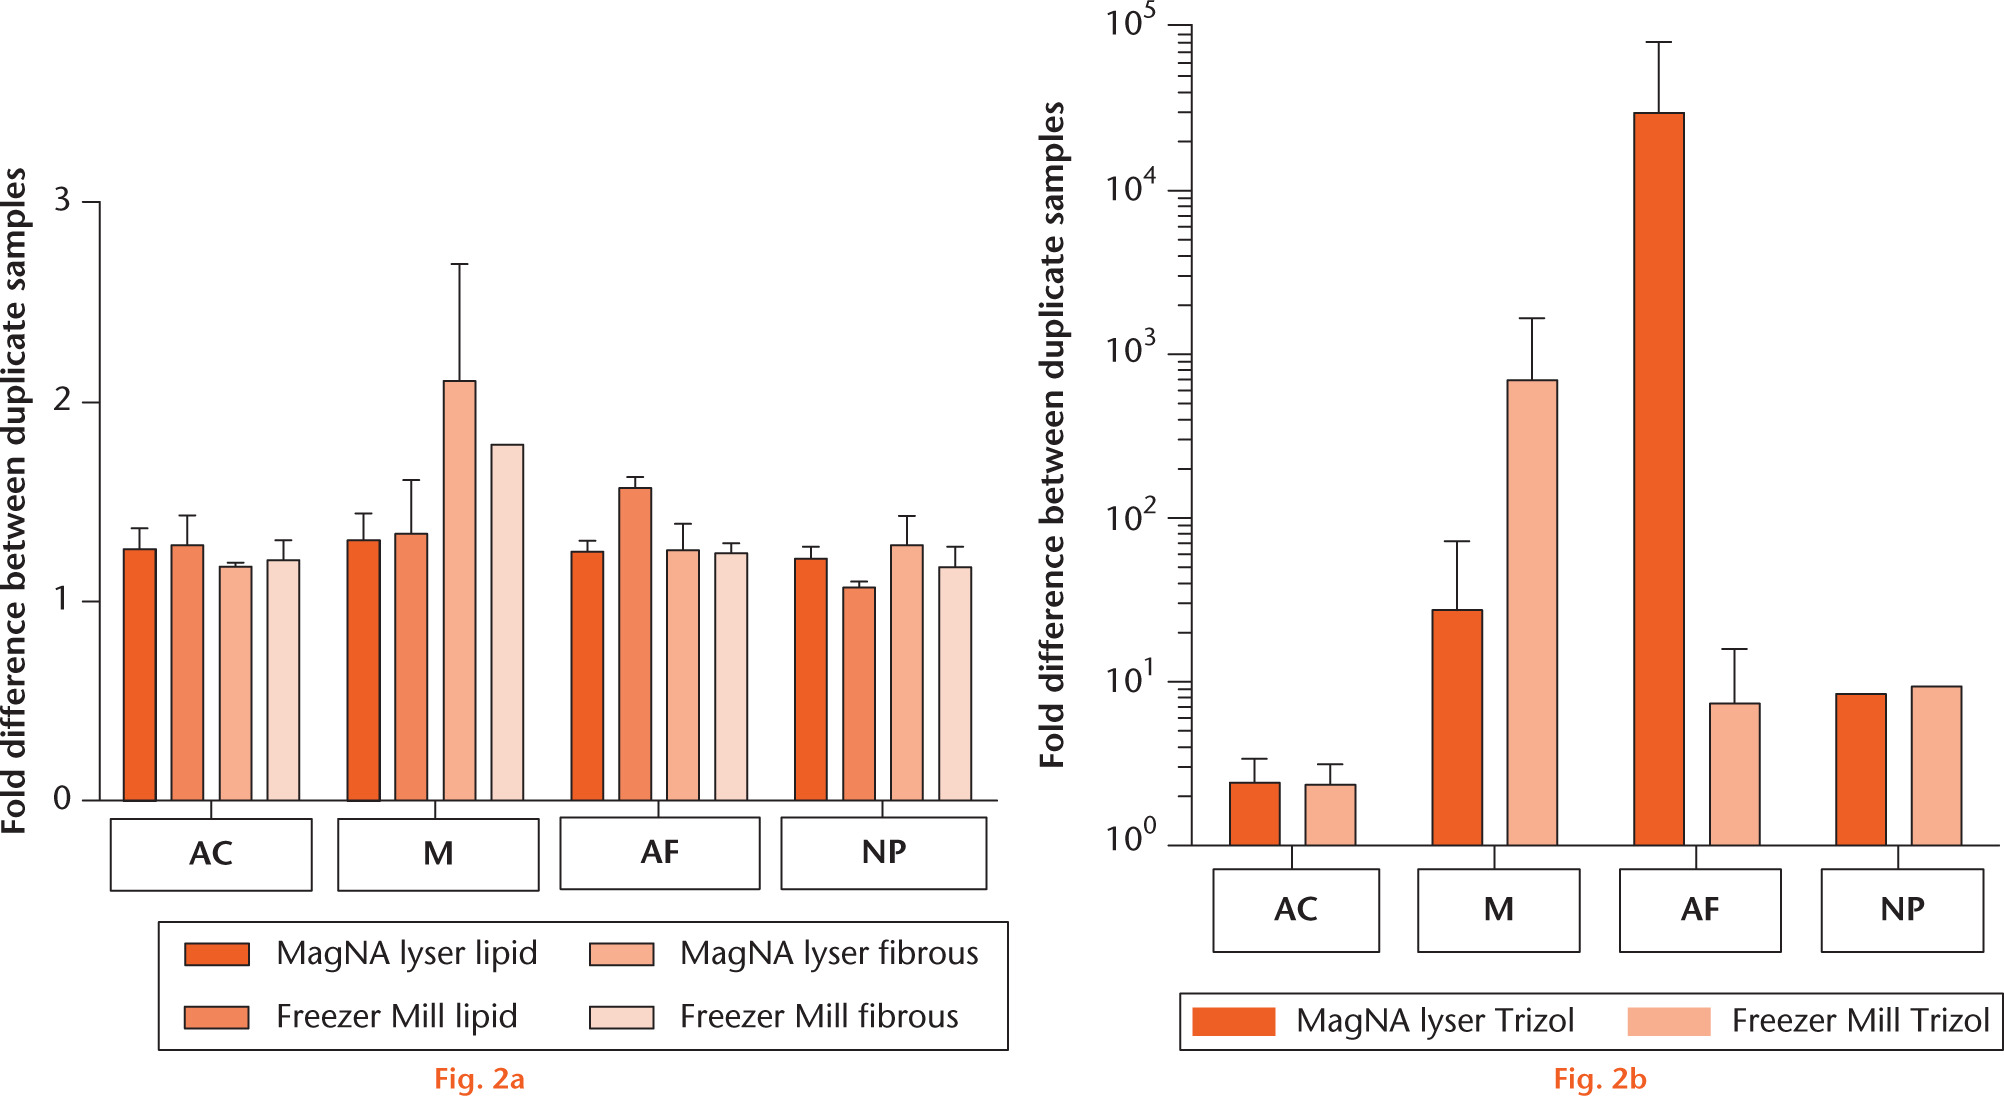  
            Graph showing the comparison of tissue homogenisation methods. The variances in aggrecan gene expression between two duplicate samples for the four cartilaginous tissues isolated with the same kit homogenised by either the MagNA Lyser (dark orange) or Freezer Mill (second bar from left): a) for the RNeasy Lipid (left hand bars × 2) and Fibrous (right hand bars × 2) kits; and b) for TRIzol. Data are presented as mean and standard error. Note the linear scale for graph (a) and the logarithmic scale for graph (b). As the aggrecan gene expression of NP tissue after RNA isolation with TRIzol could only be determined for the duplicates of the samples of one goat for both homogenisation methods, no error bars are shown. (AC, articular cartilage; M, meniscus; AF, annulus fibrosus; NP, nucleus pulposus.)
          